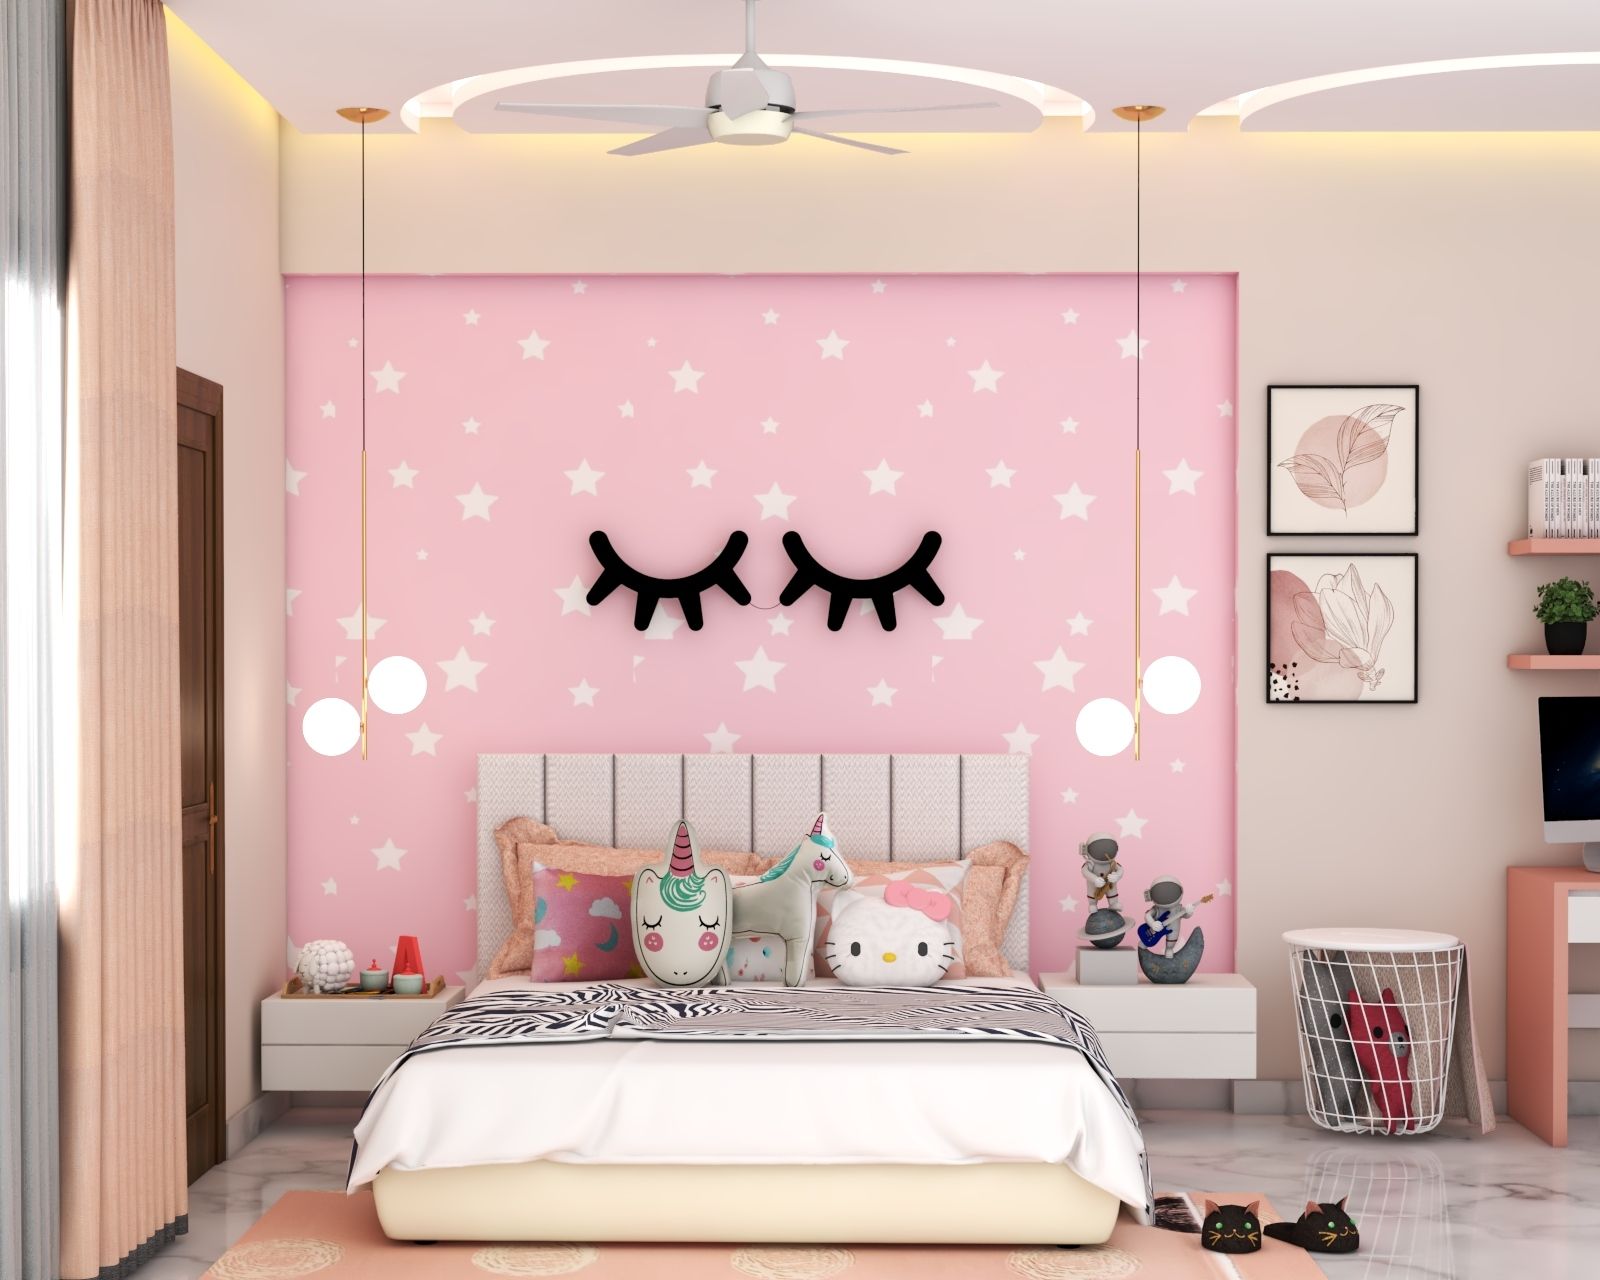 9 Next-Level Kids' Bedroom Ideas For Your Little Ones